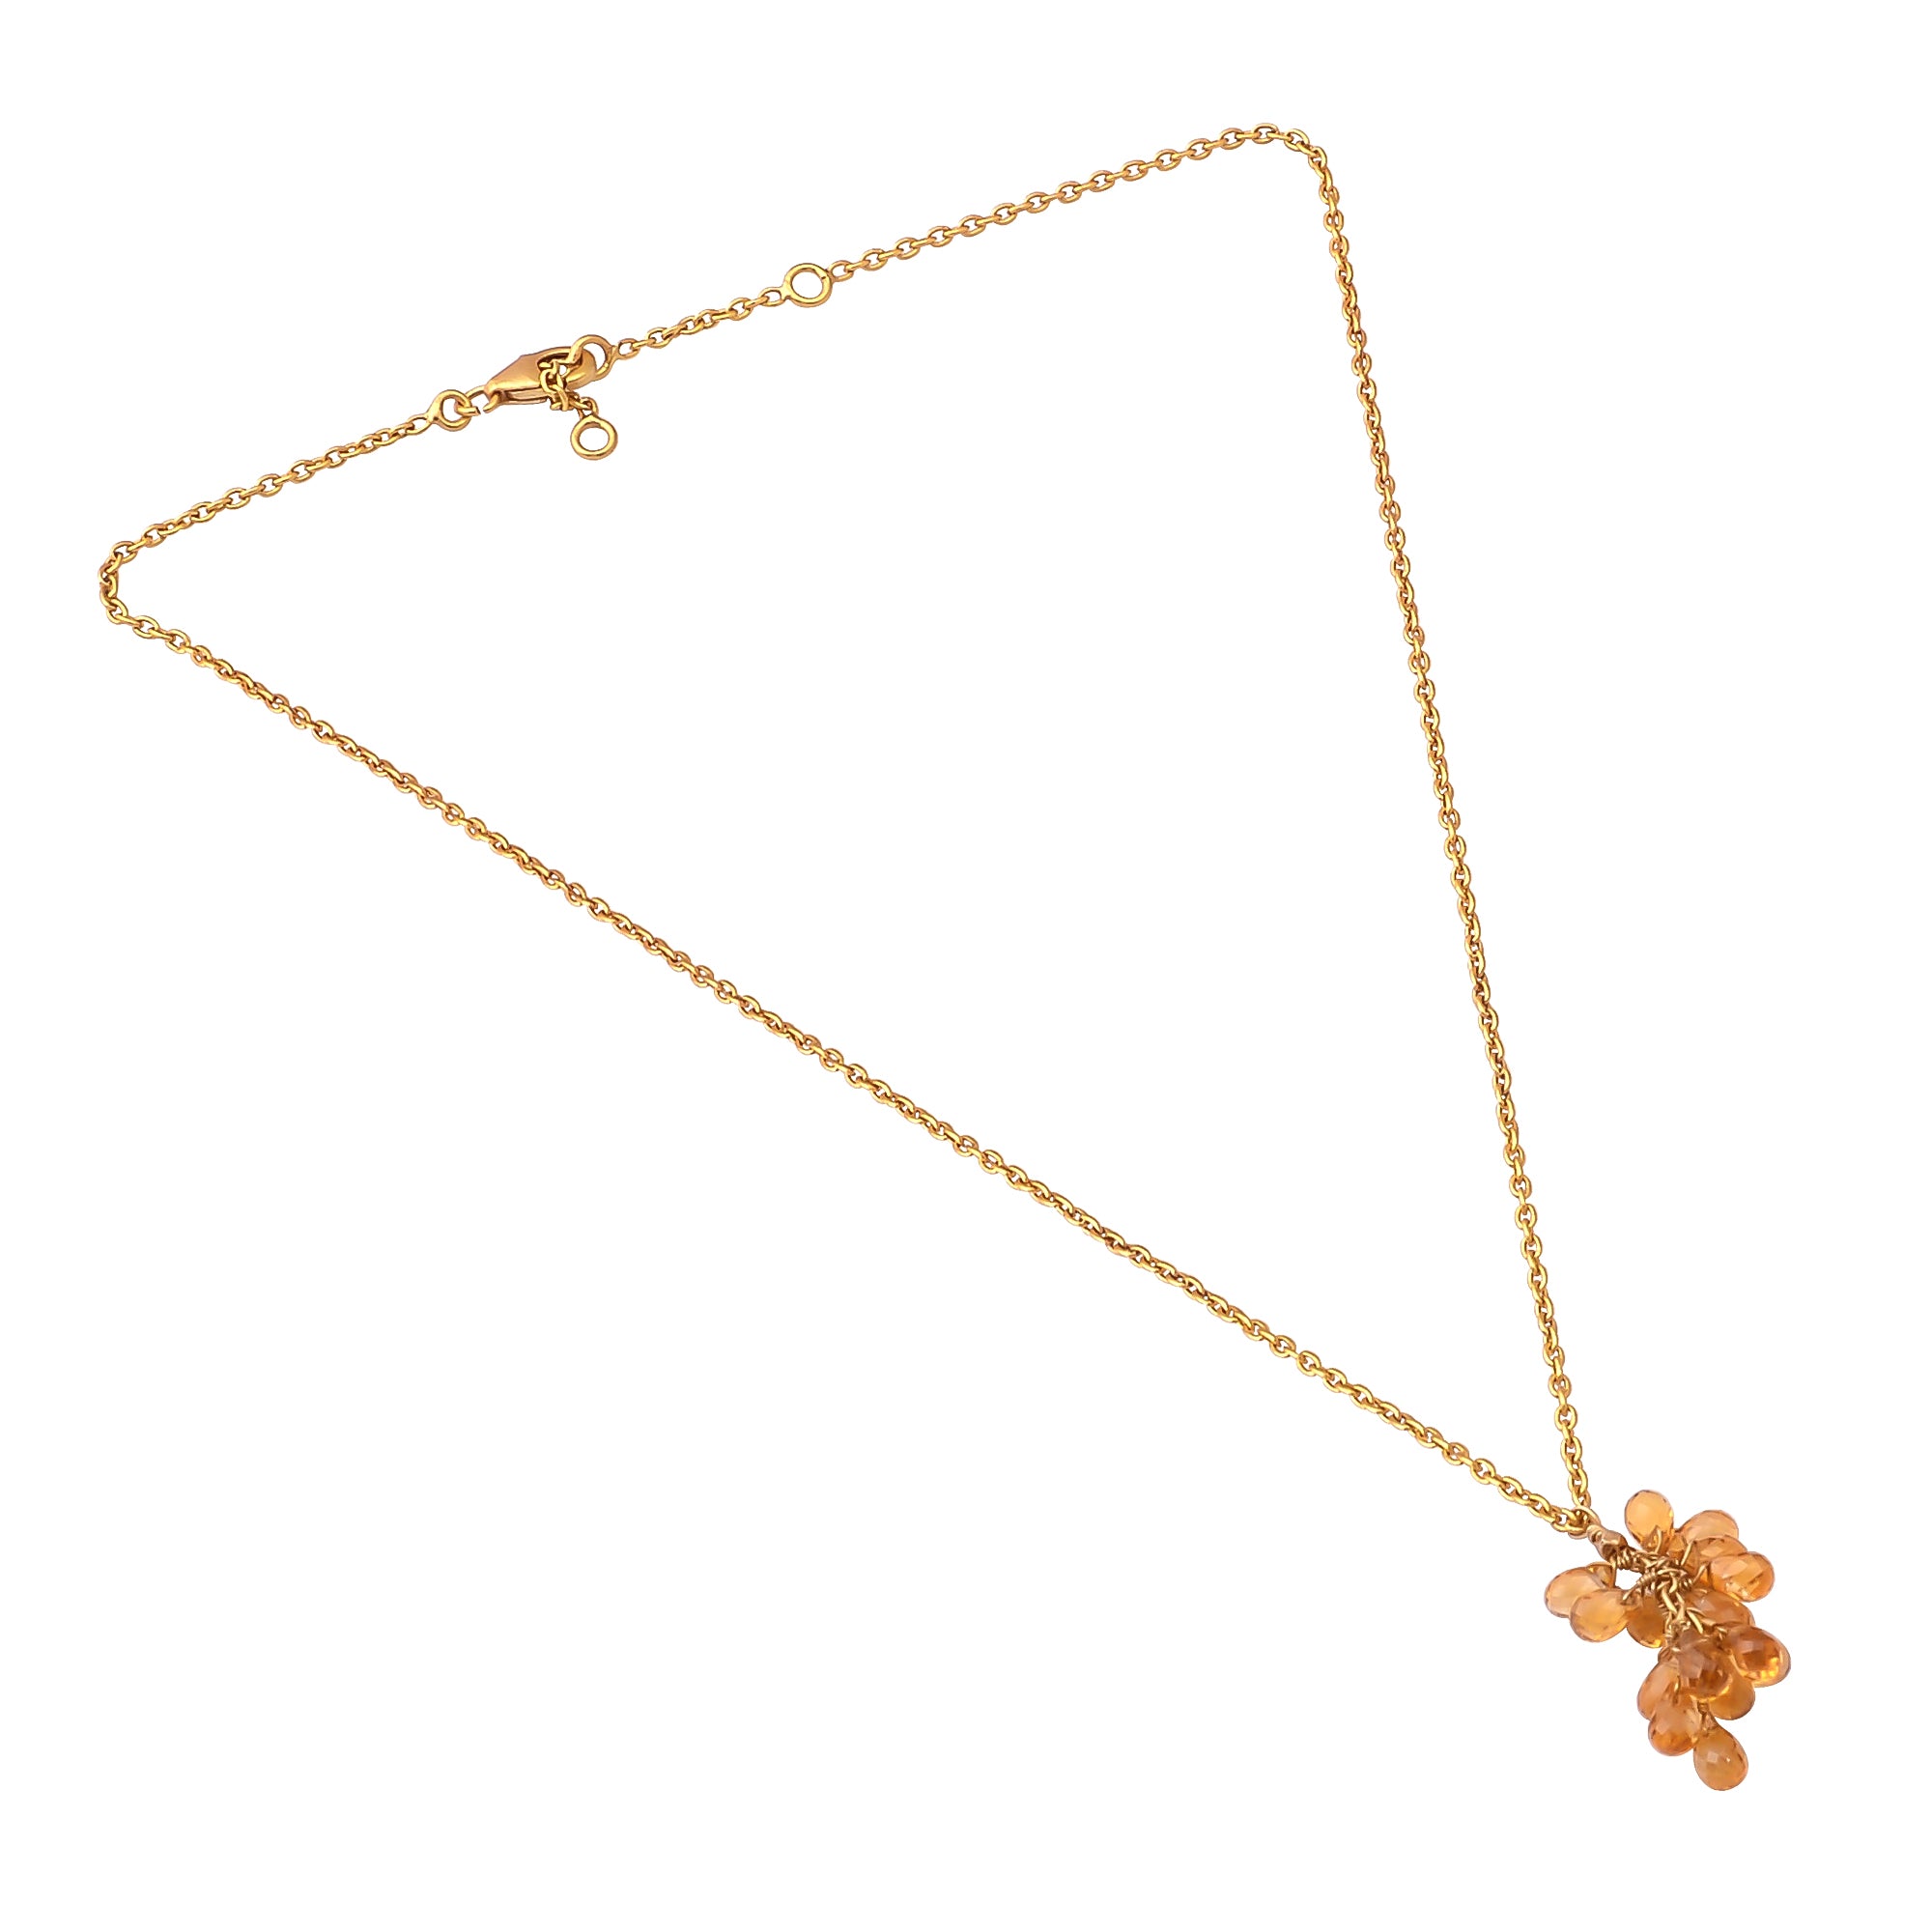 Buy Handcrafted Silver Gold Plated Citrine Drop Cluster Necklace